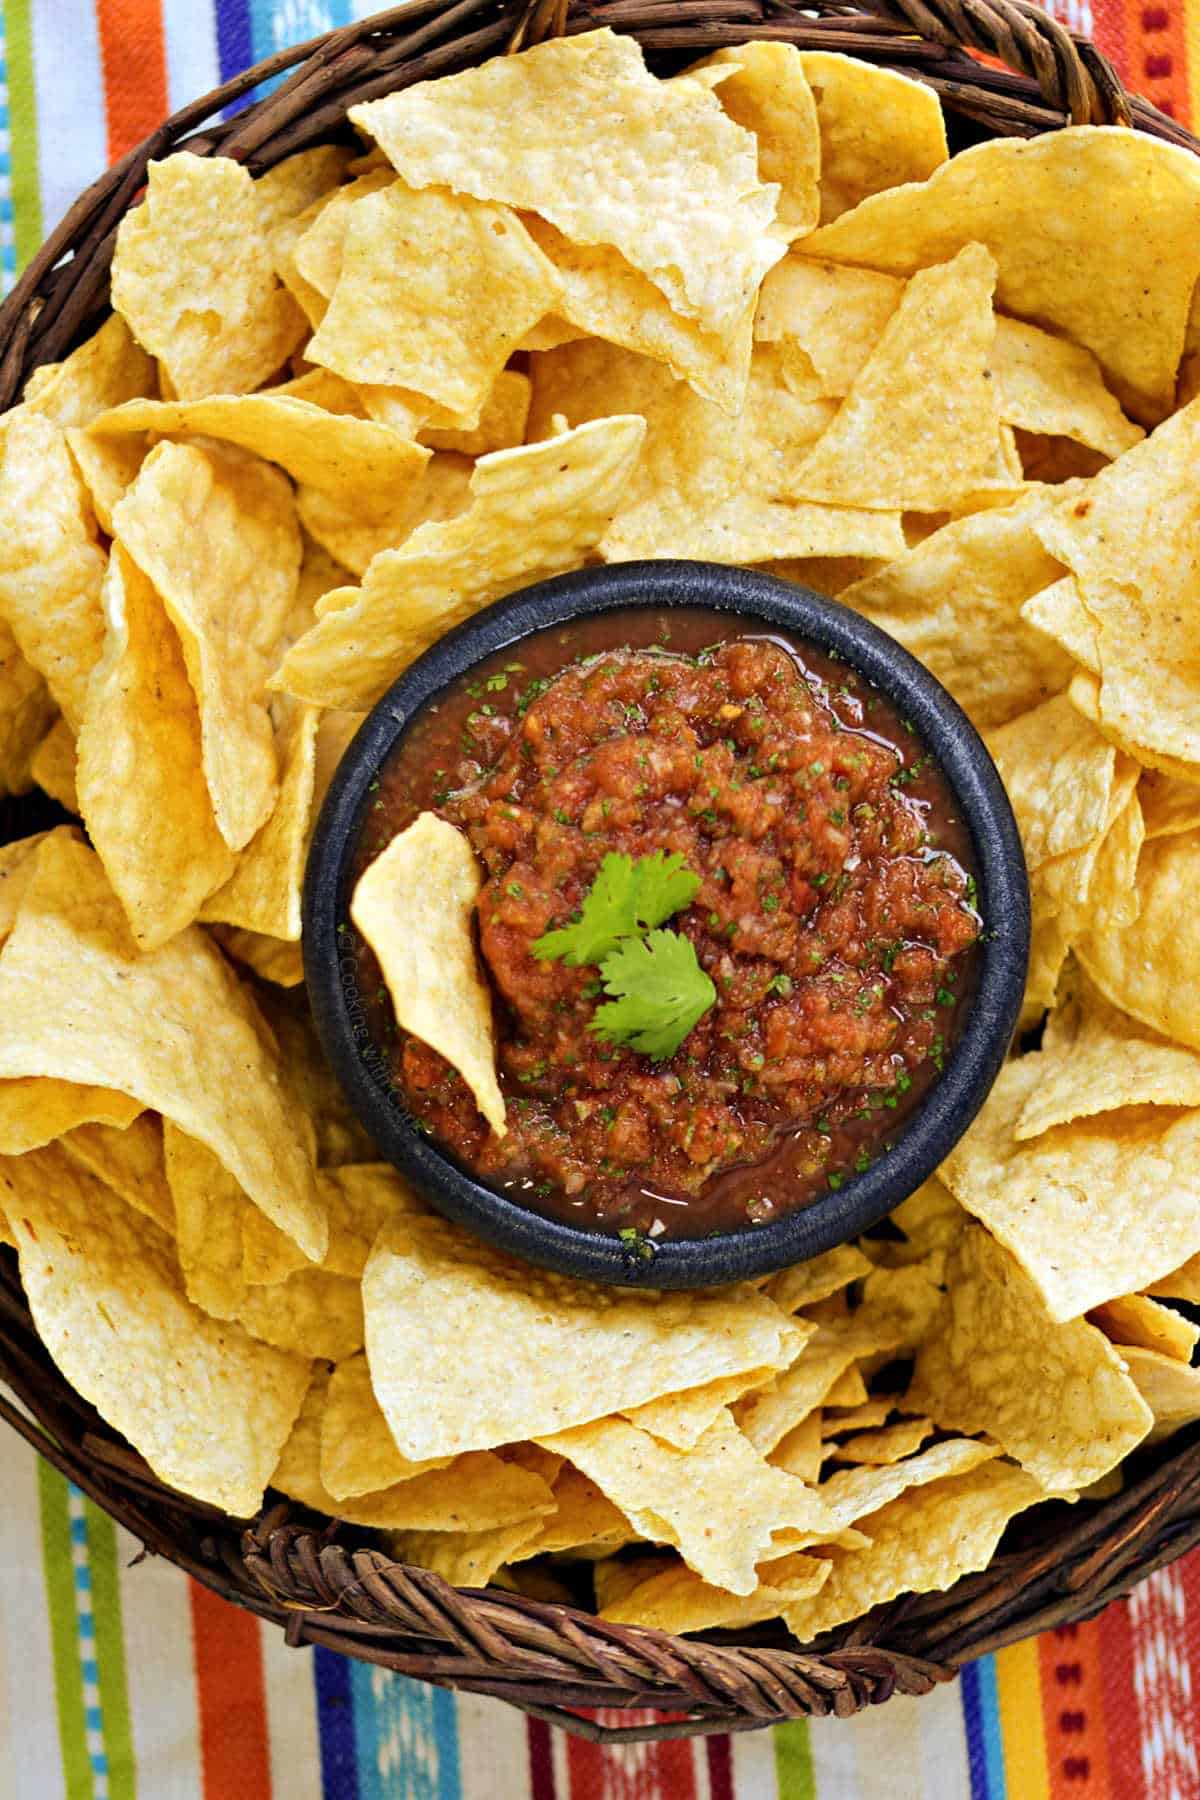 A small bowl of restaurant style salsa roja surrounded by tortilla chips.